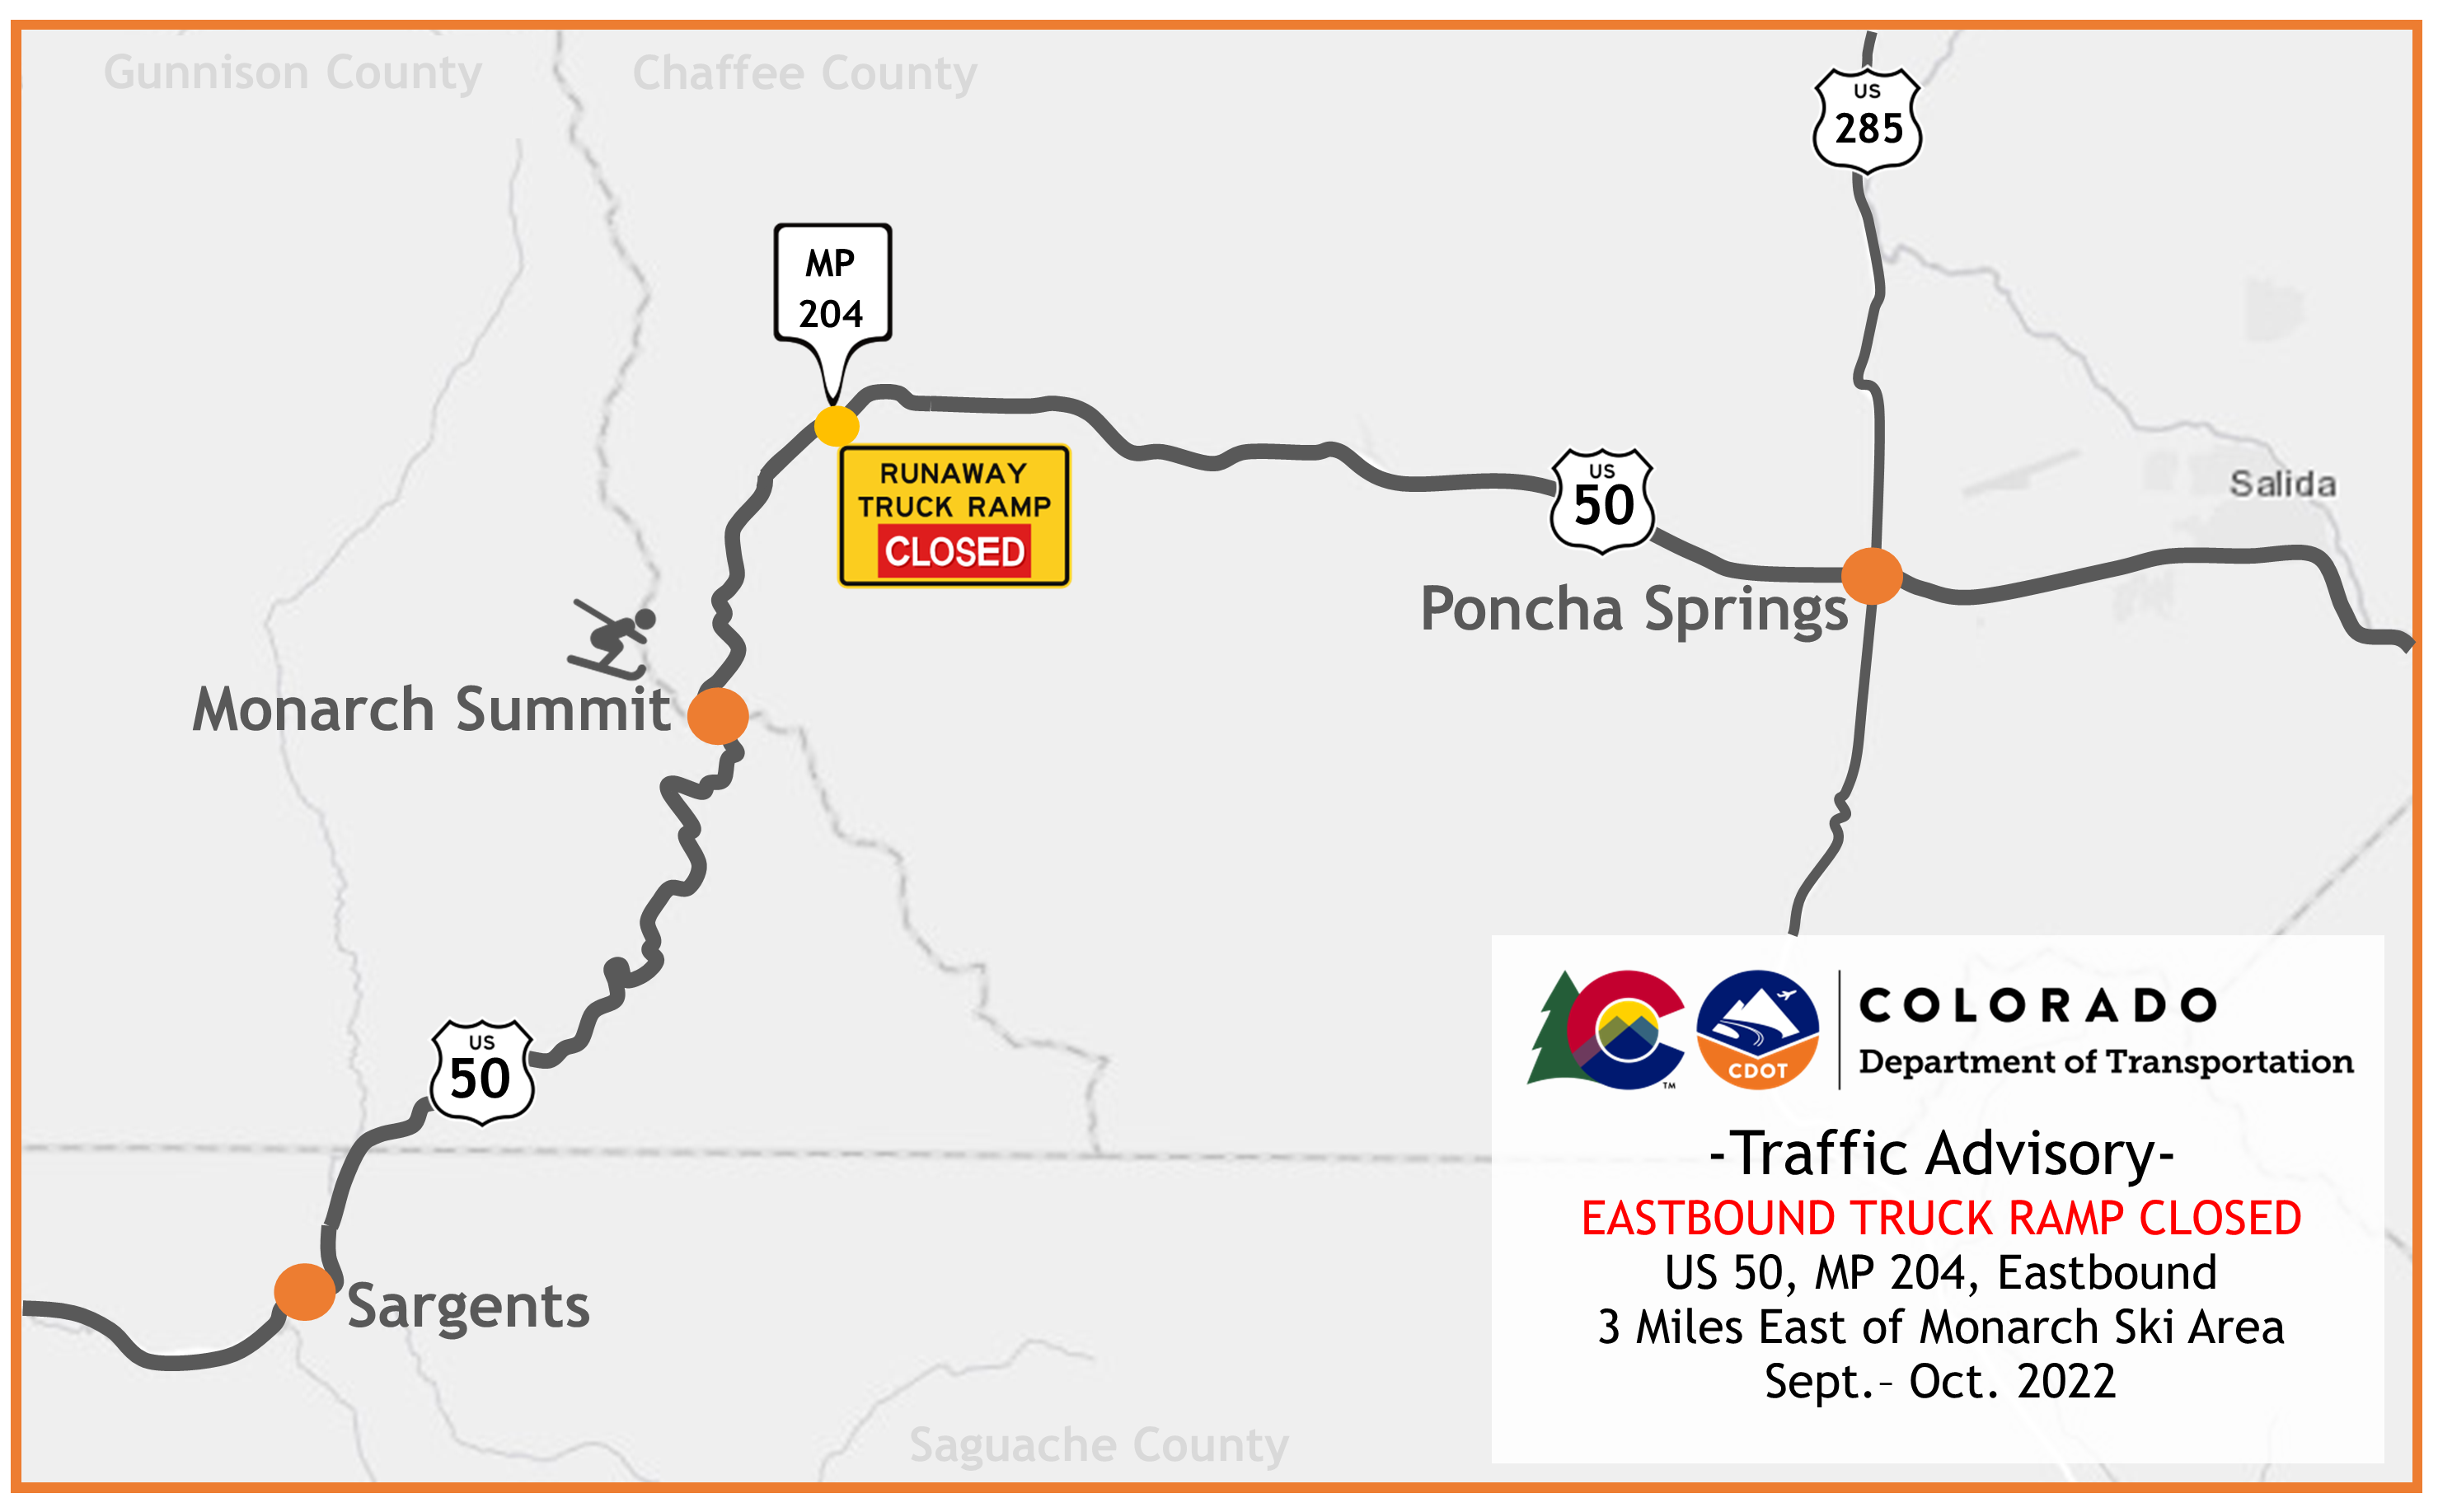 US 50 eastbound 3 miles east of Monarch Ski area eastbound truck ramp closure map detail image